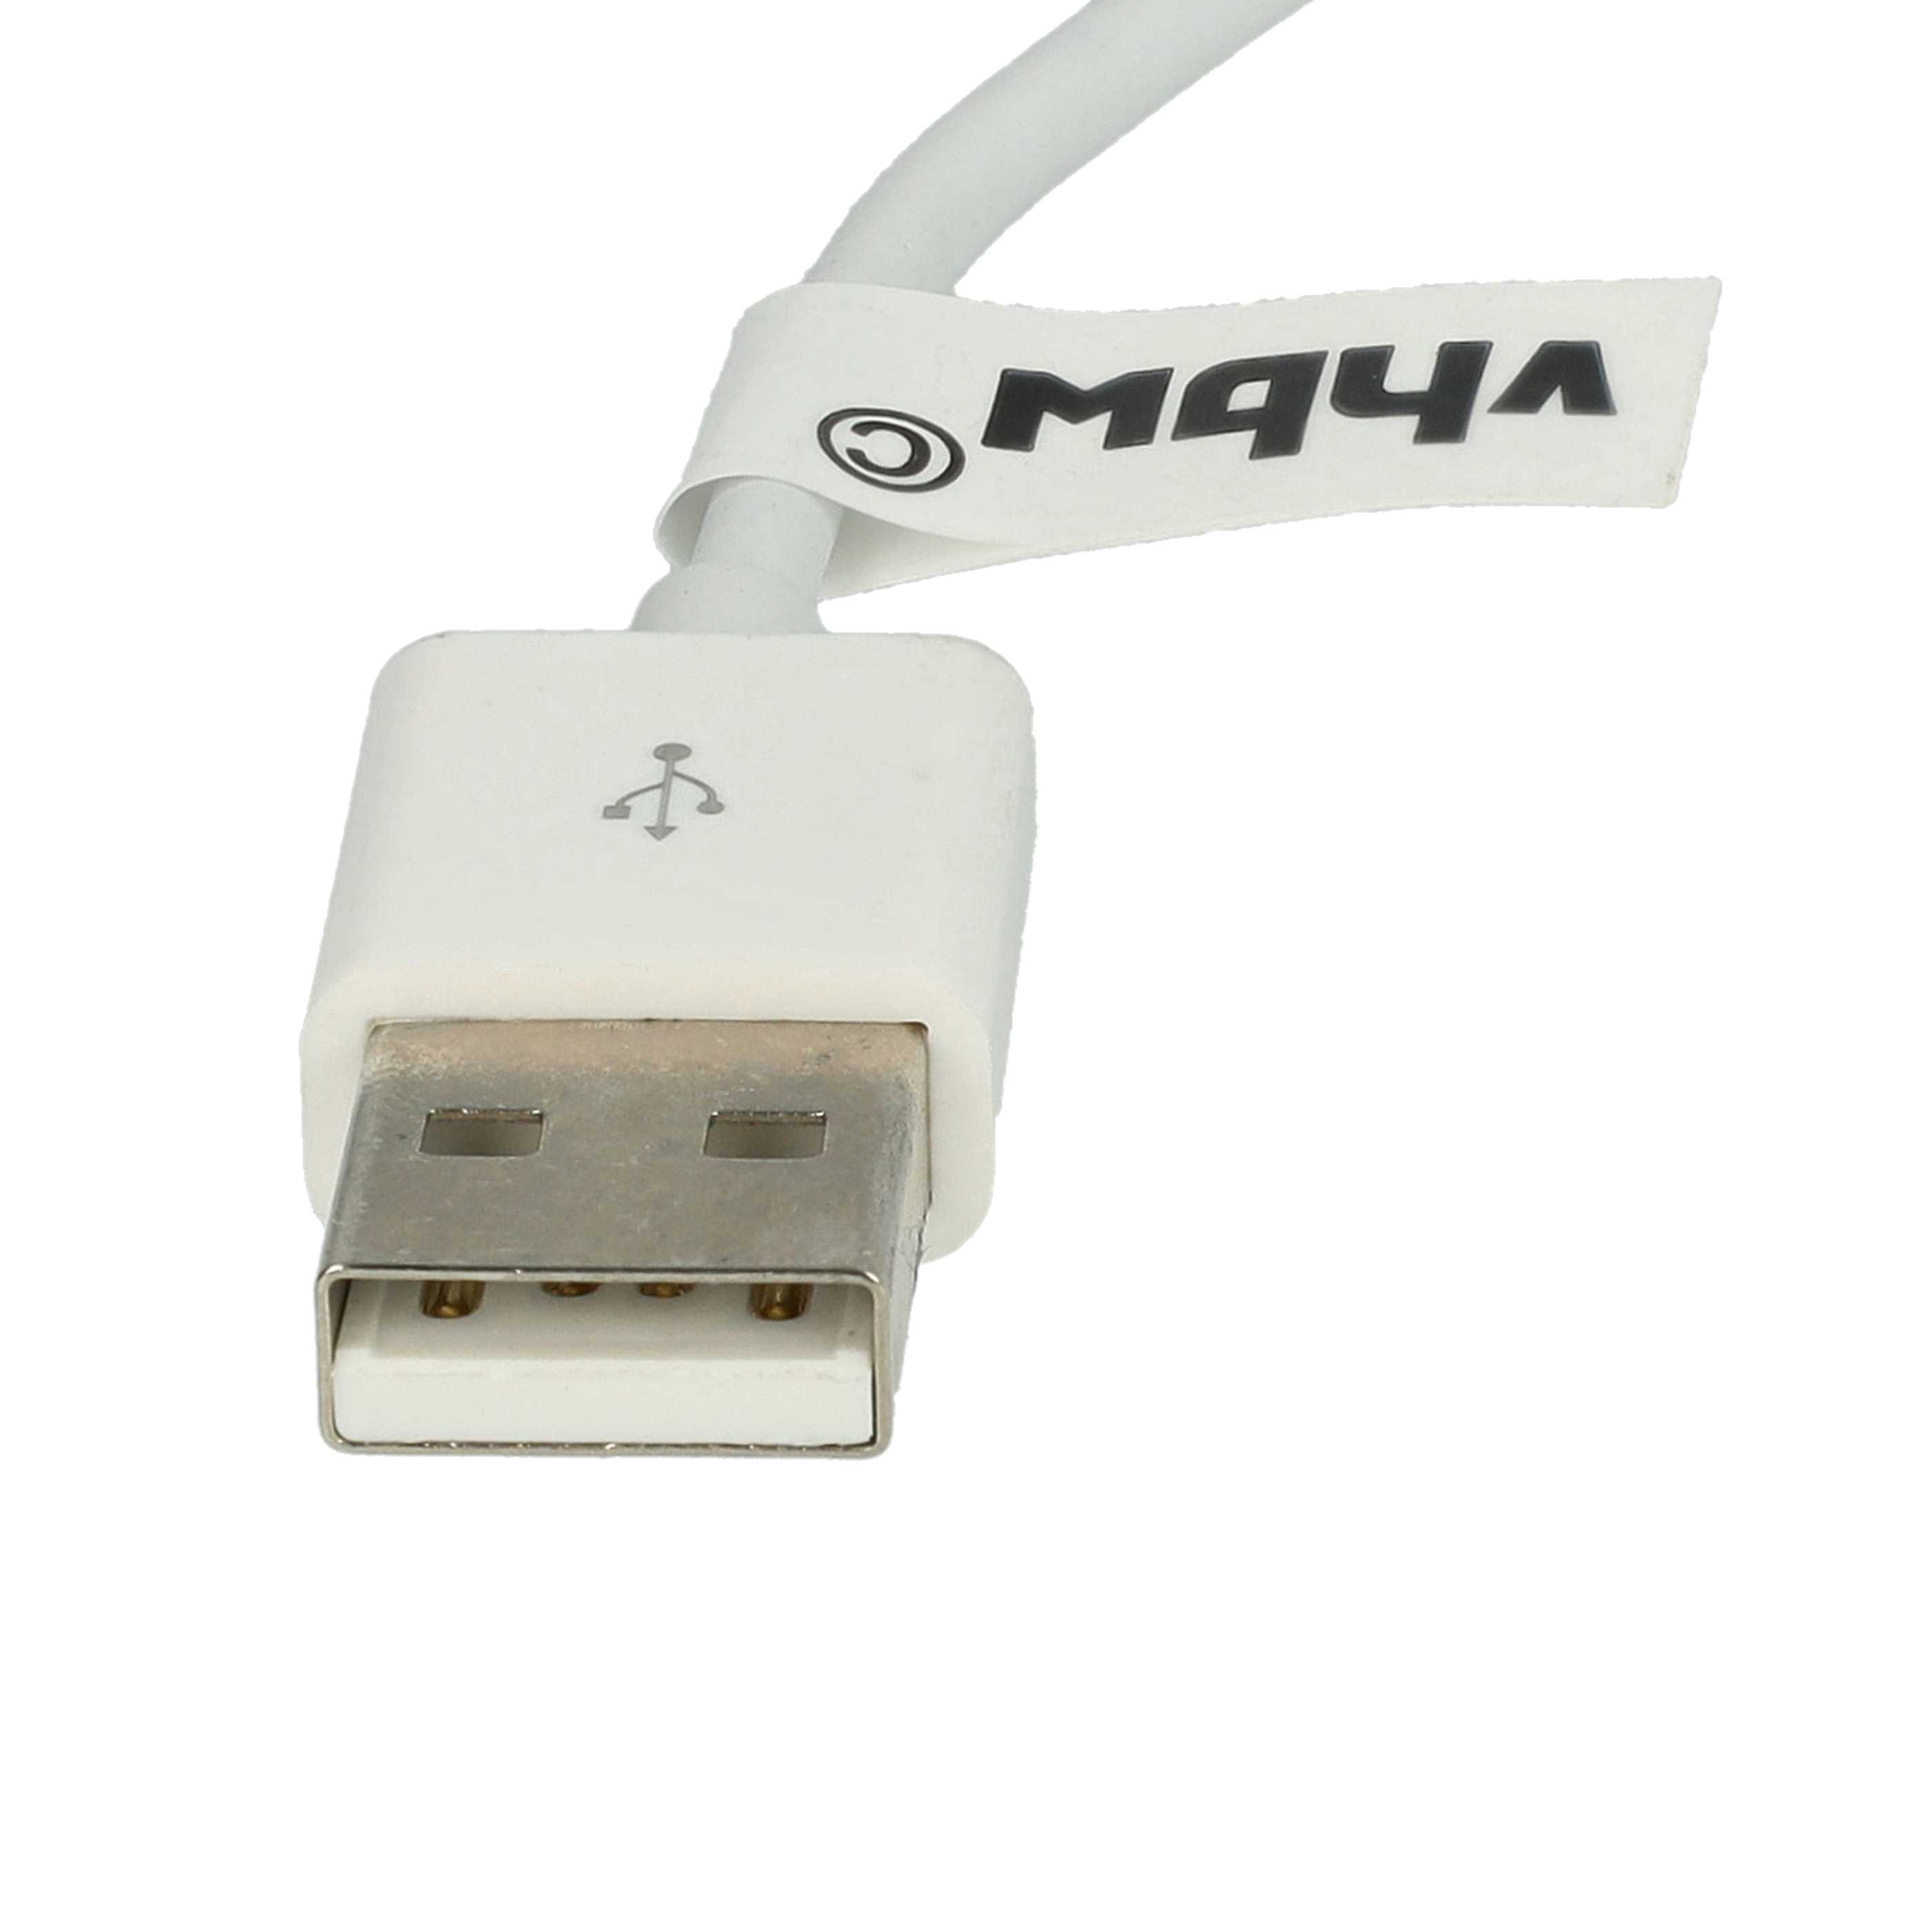 USB Data Cable Charging Cable suitable for Dr. Dre / Apple Beats etc.